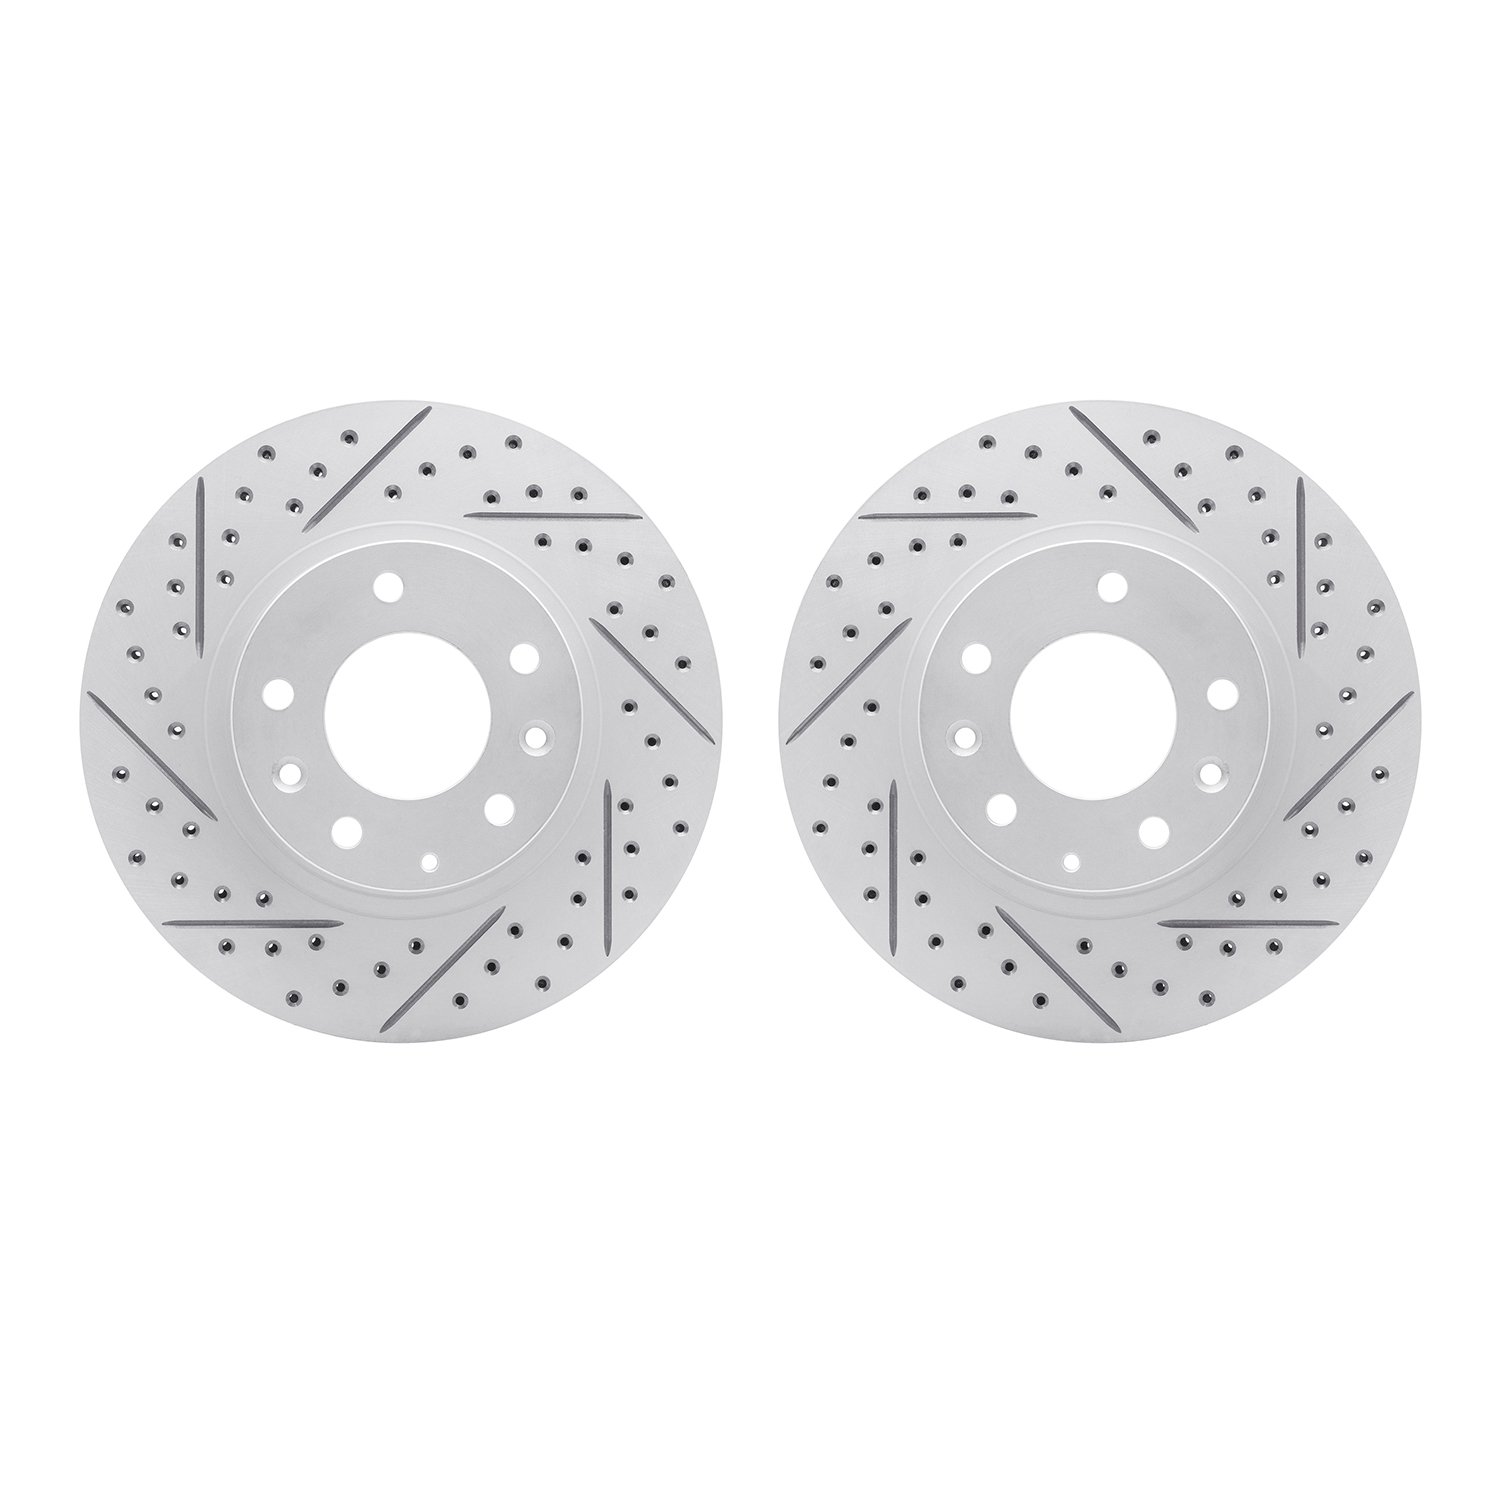 2002-80025 Geoperformance Drilled/Slotted Brake Rotors, 1993-1995 Ford/Lincoln/Mercury/Mazda, Position: Front